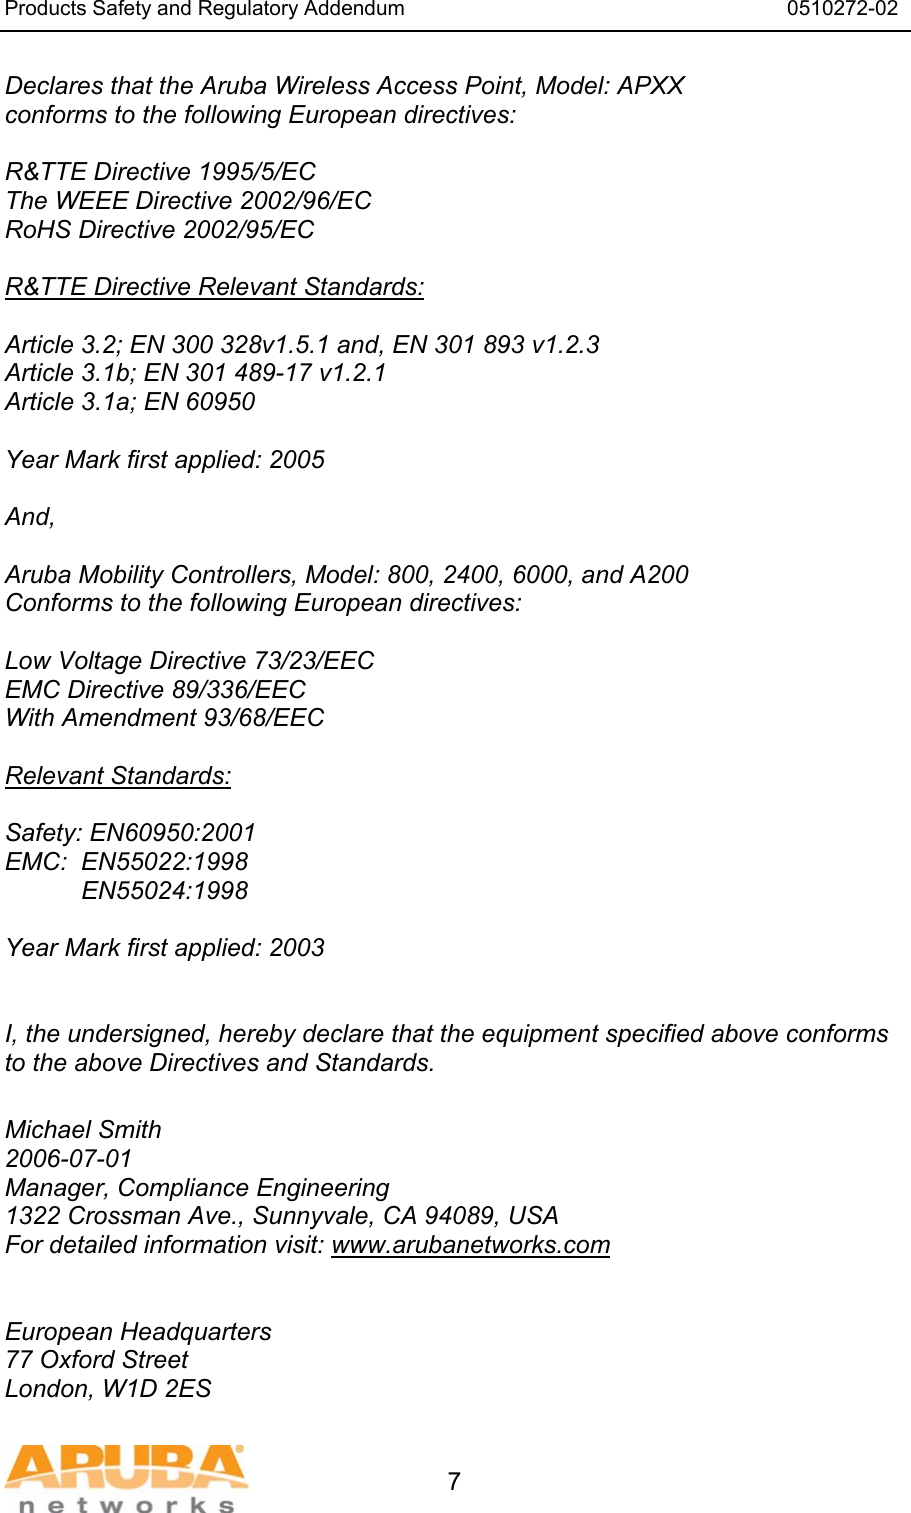 Products Safety and Regulatory Addendum                                                                  0510272-02   7 Declares that the Aruba Wireless Access Point, Model: APXX conforms to the following European directives:  R&amp;TTE Directive 1995/5/EC The WEEE Directive 2002/96/EC RoHS Directive 2002/95/EC  R&amp;TTE Directive Relevant Standards:  Article 3.2; EN 300 328v1.5.1 and, EN 301 893 v1.2.3 Article 3.1b; EN 301 489-17 v1.2.1 Article 3.1a; EN 60950  Year Mark first applied: 2005  And,  Aruba Mobility Controllers, Model: 800, 2400, 6000, and A200 Conforms to the following European directives:  Low Voltage Directive 73/23/EEC EMC Directive 89/336/EEC With Amendment 93/68/EEC  Relevant Standards:  Safety: EN60950:2001 EMC:  EN55022:1998            EN55024:1998  Year Mark first applied: 2003    I, the undersigned, hereby declare that the equipment specified above conforms to the above Directives and Standards.  Michael Smith 2006-07-01 Manager, Compliance Engineering 1322 Crossman Ave., Sunnyvale, CA 94089, USA For detailed information visit: www.arubanetworks.com   European Headquarters 77 Oxford Street London, W1D 2ES 